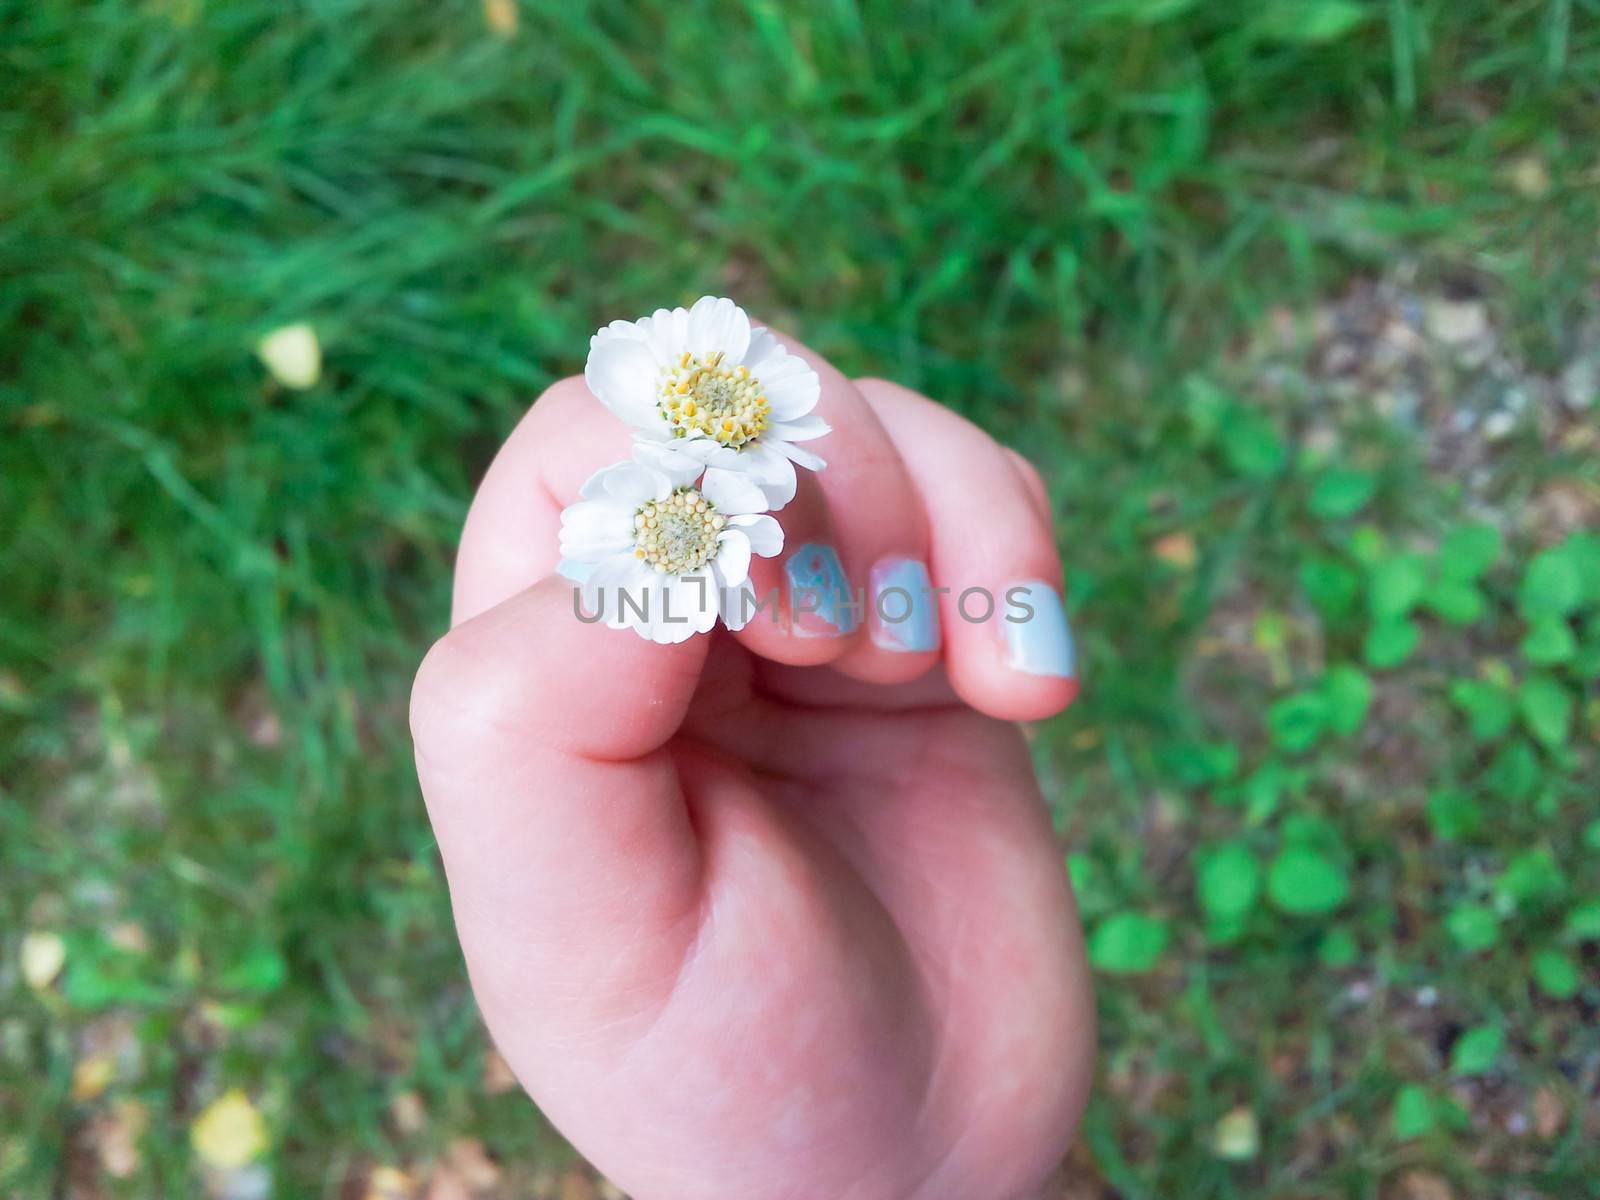 Toddler holding small white flowers with light blue manicure